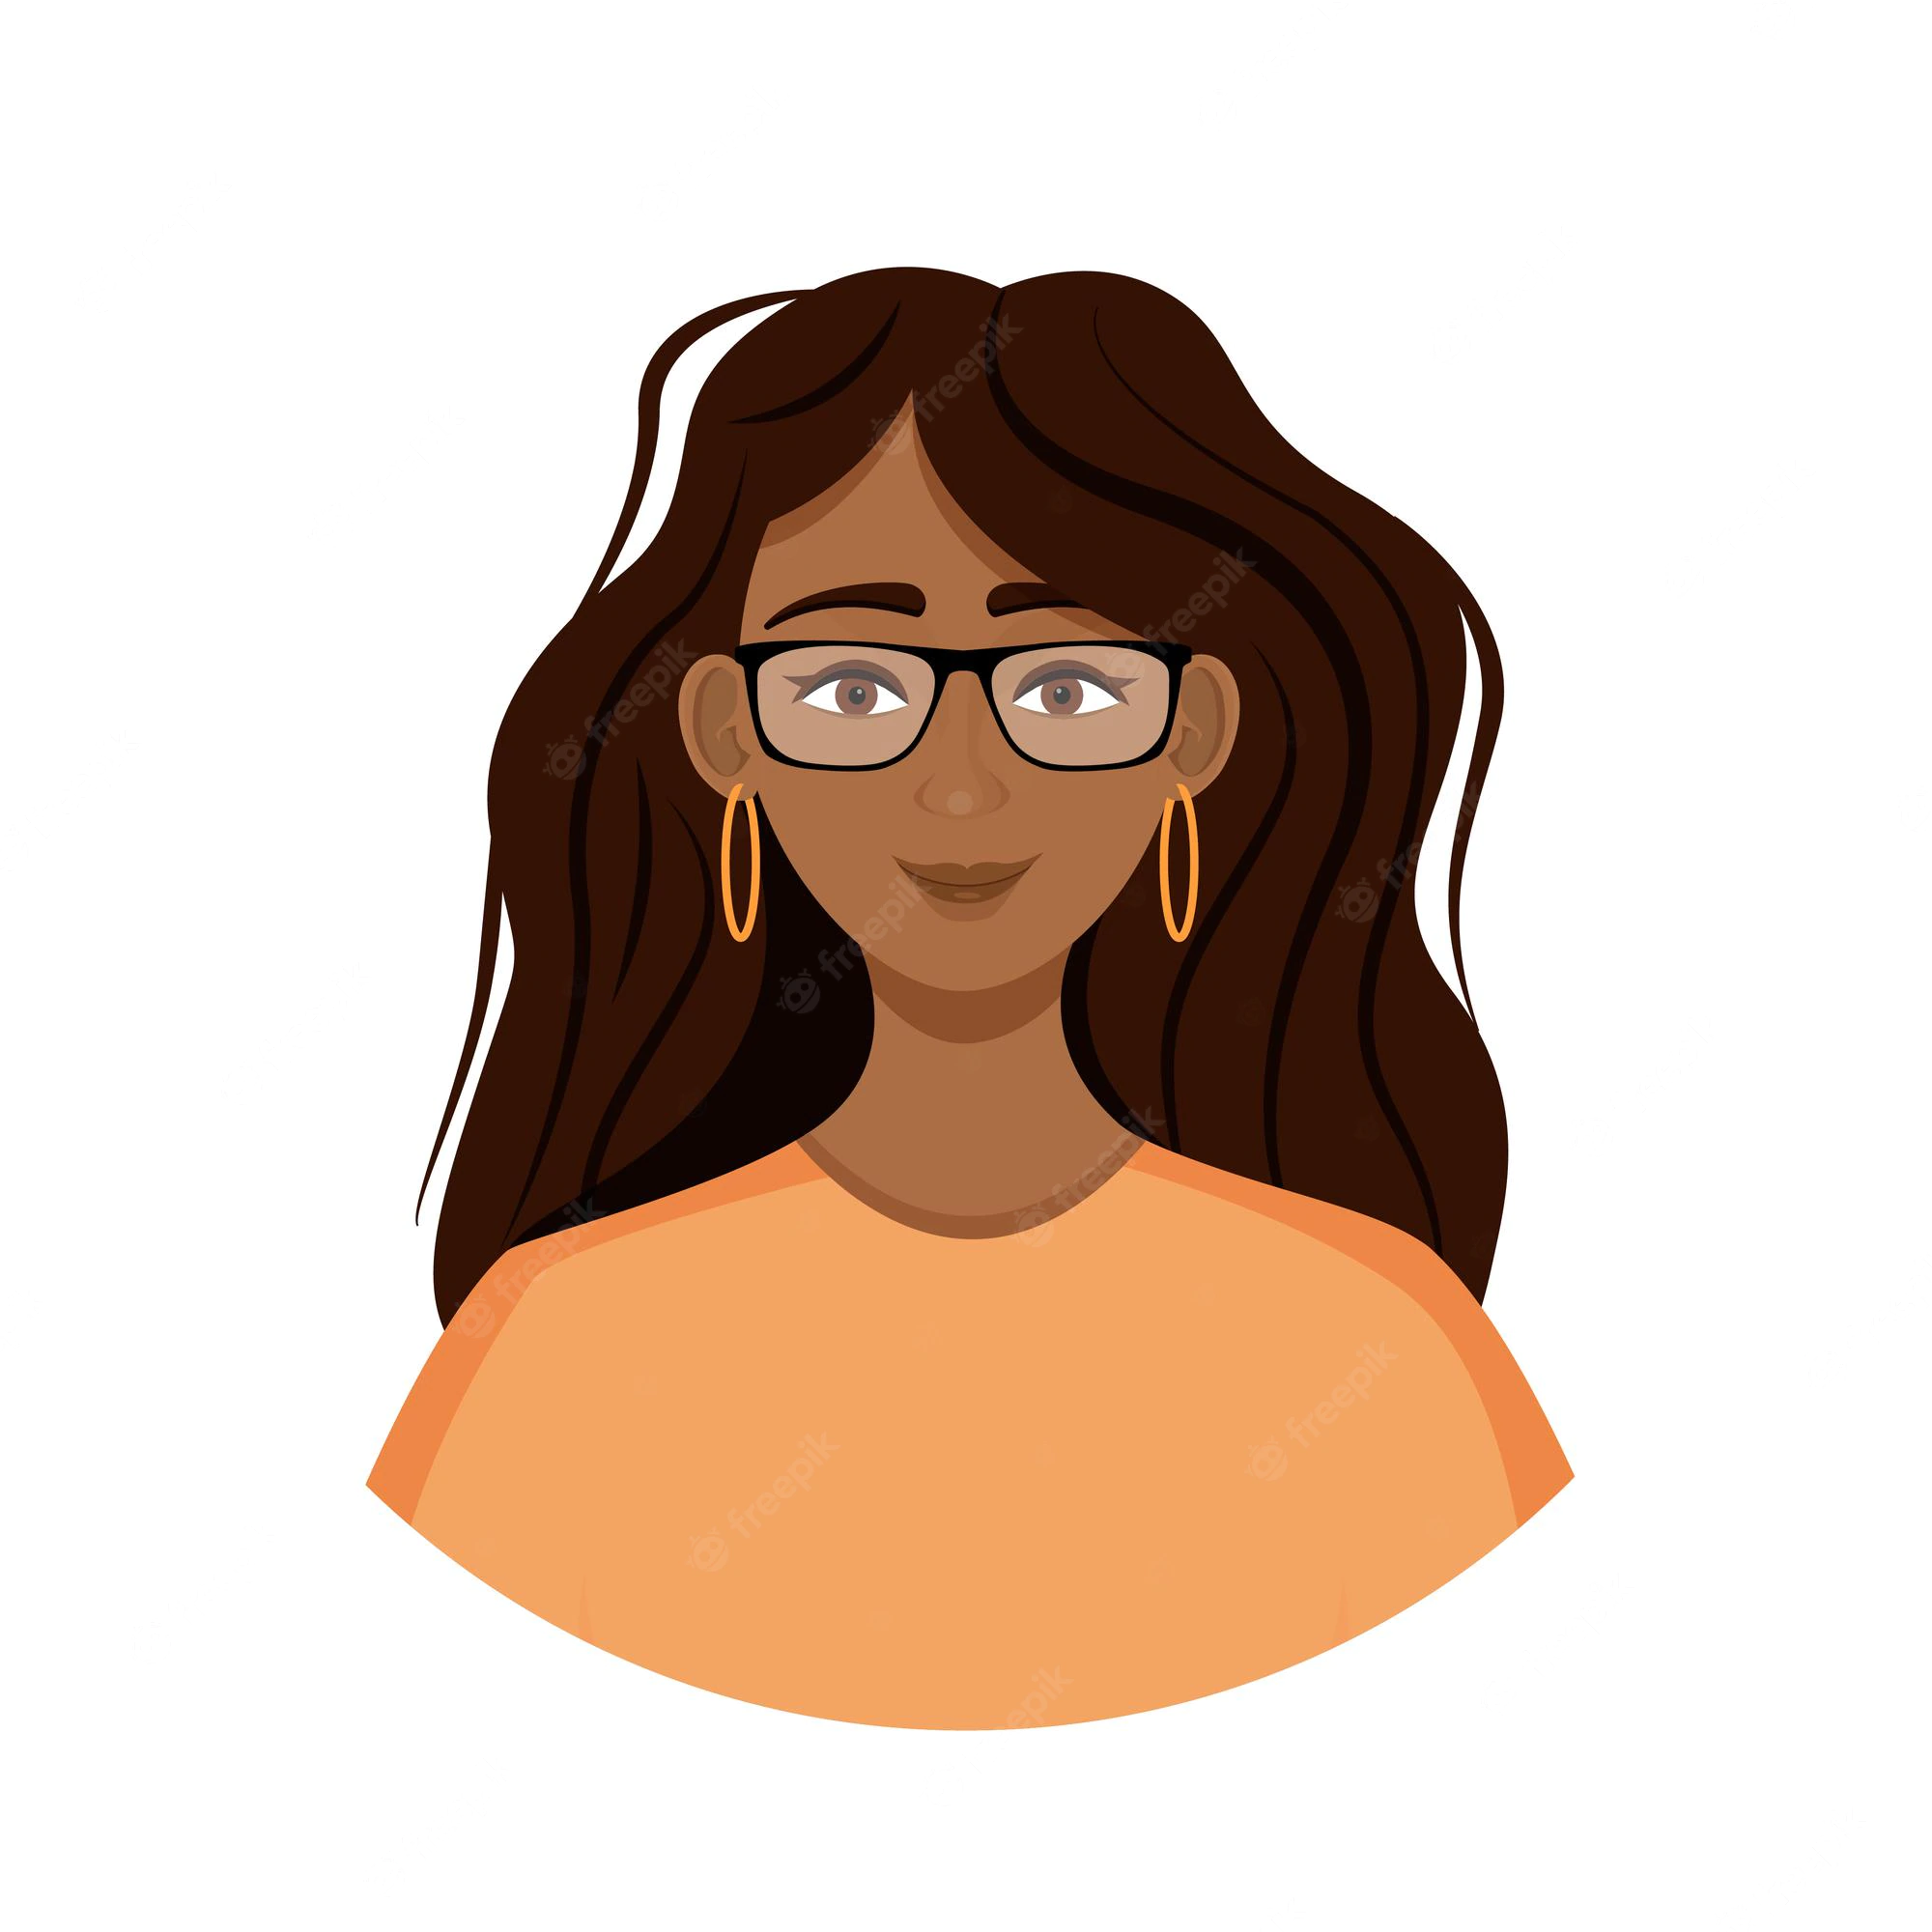 african-american-woman-avatar-with-glasses-portrait-young-girl-vector-illustration-face_217290-363